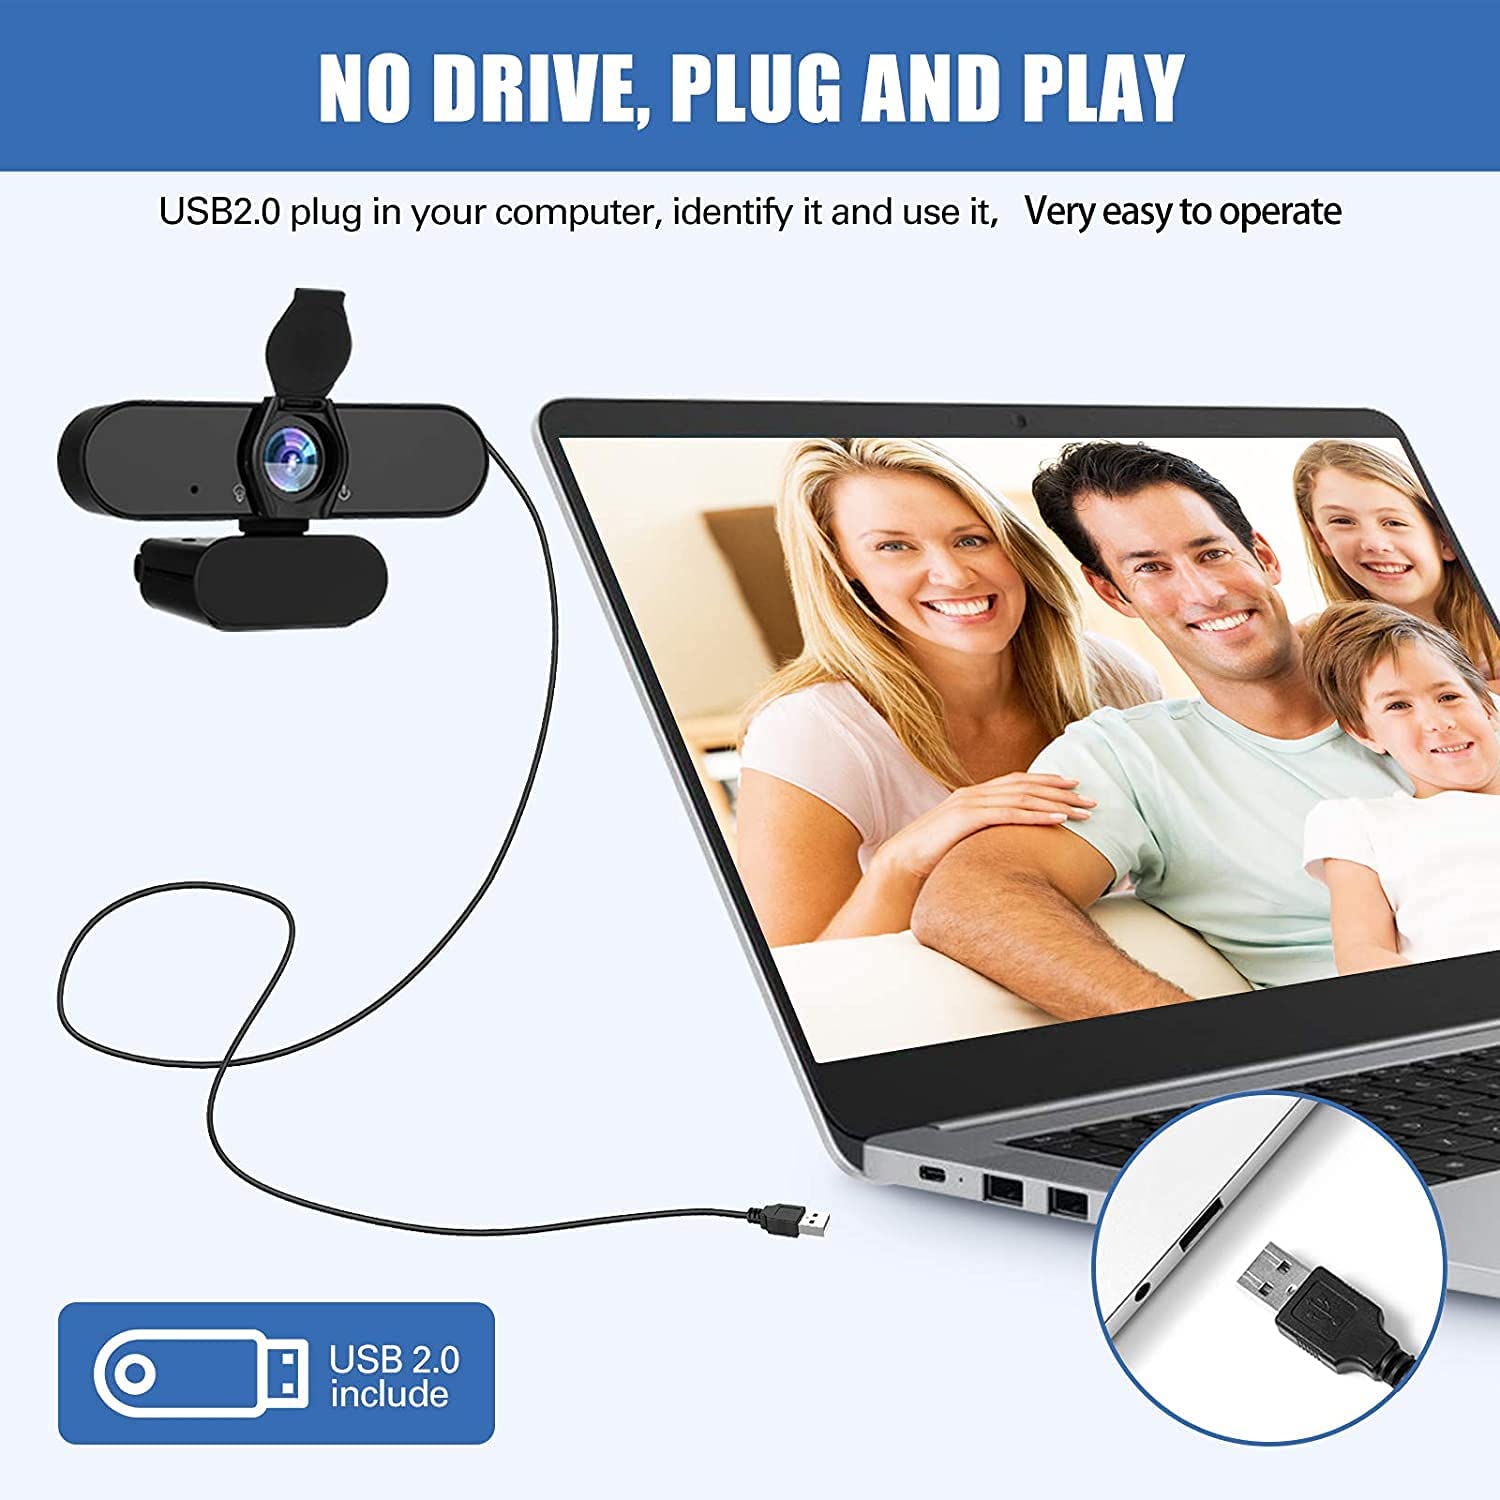 Webcam HD 1080p Web Camera, USB PC Computer Webcam with Microphone, Laptop Desktop Full HD Camera Video Webcam 360 Degree Widescreen, Pro Streaming Webcam for Recording, Calling, Conferencing, Gaming - image 2 of 8